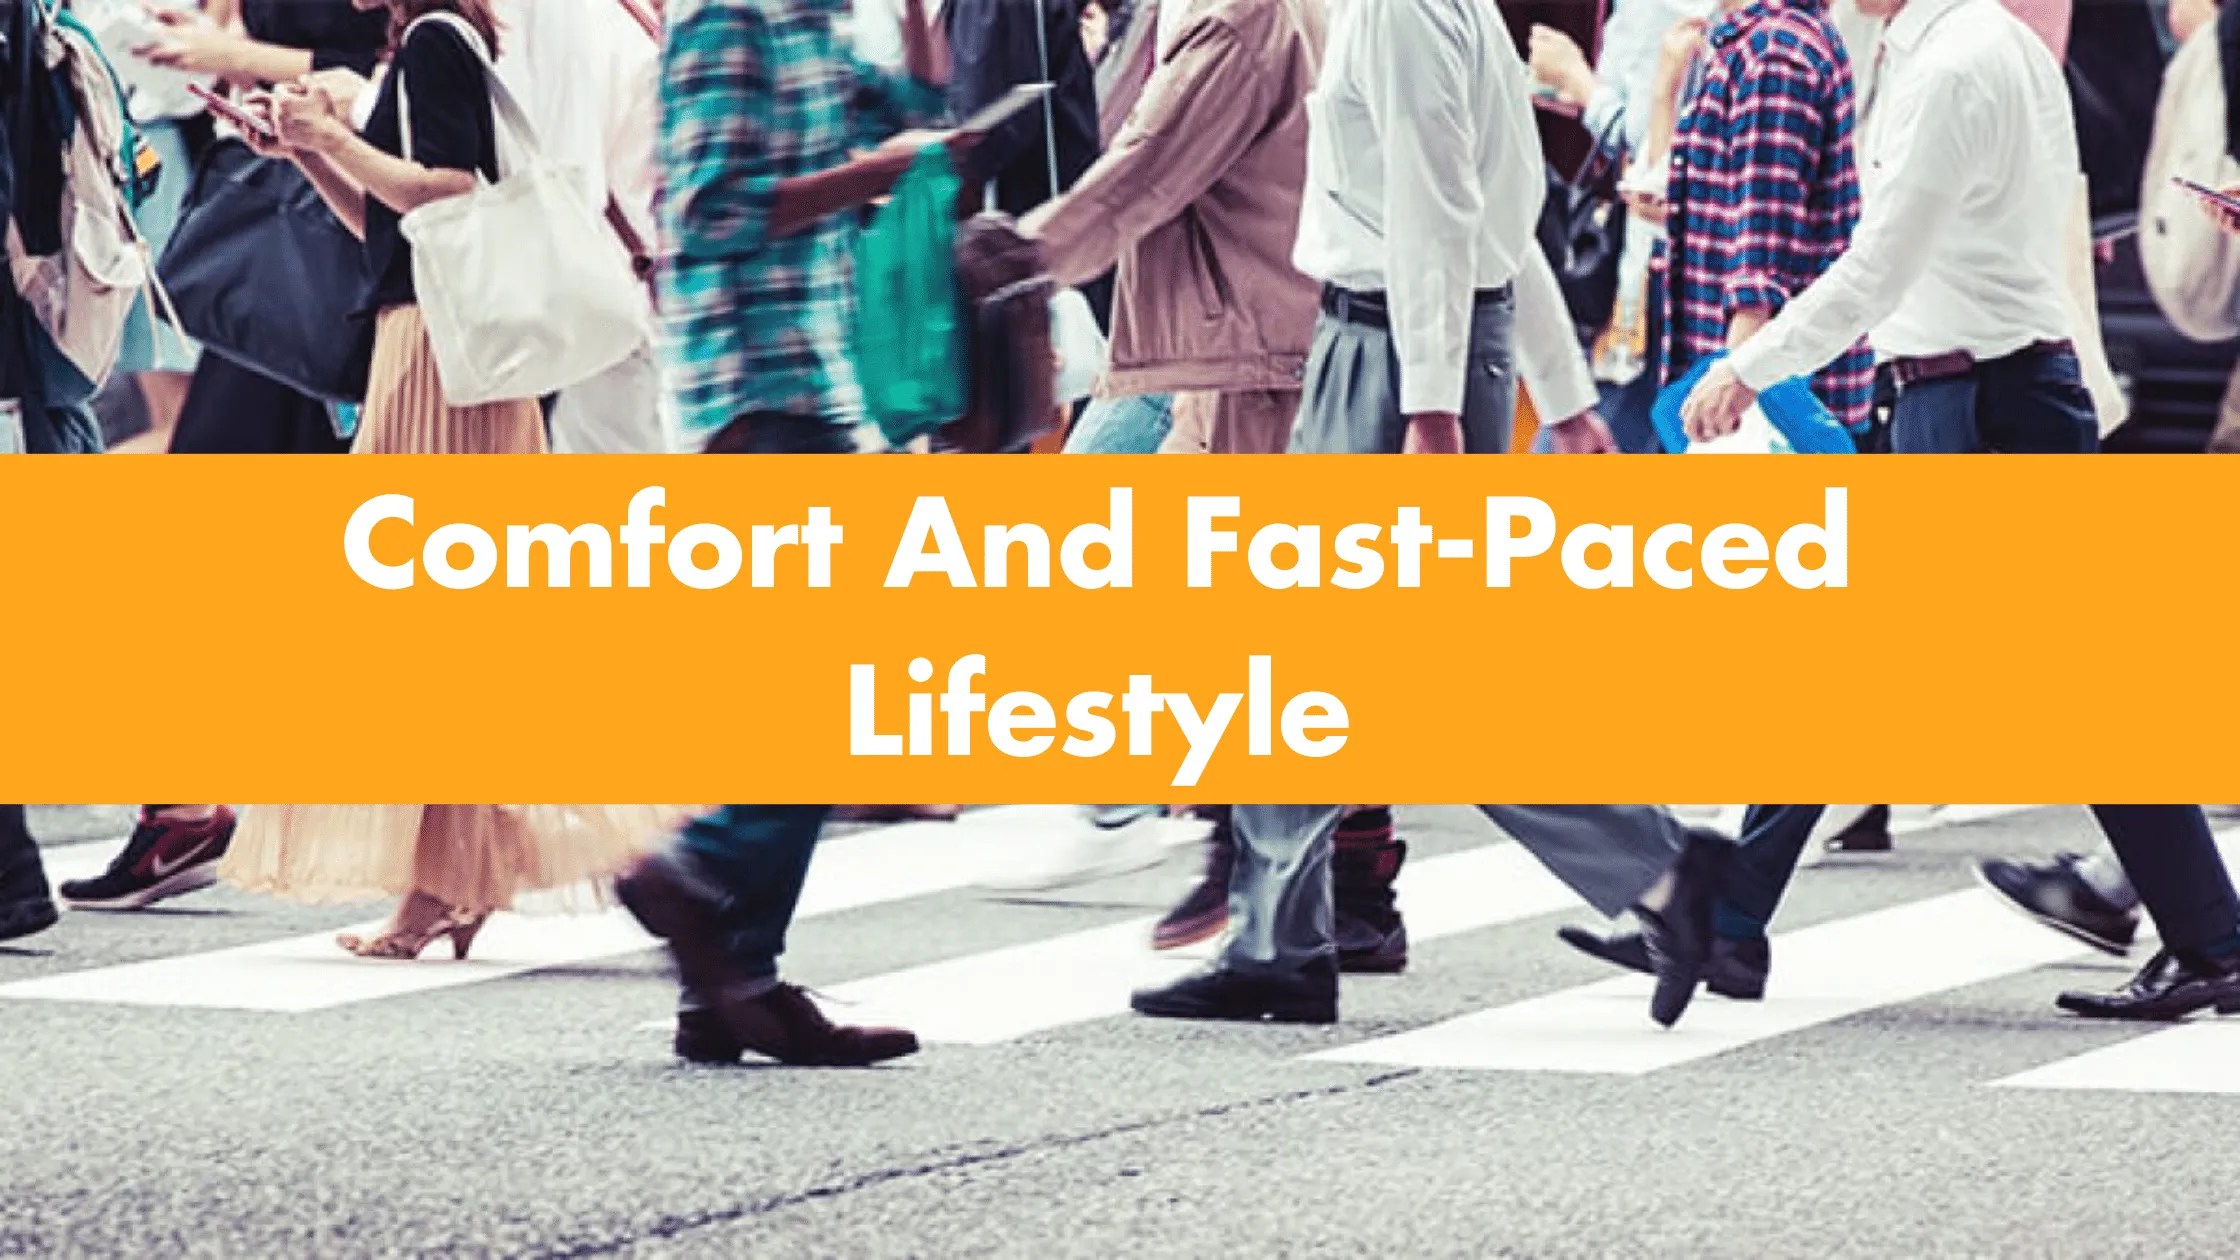 Comfort And Fast-Paced Lifestyle